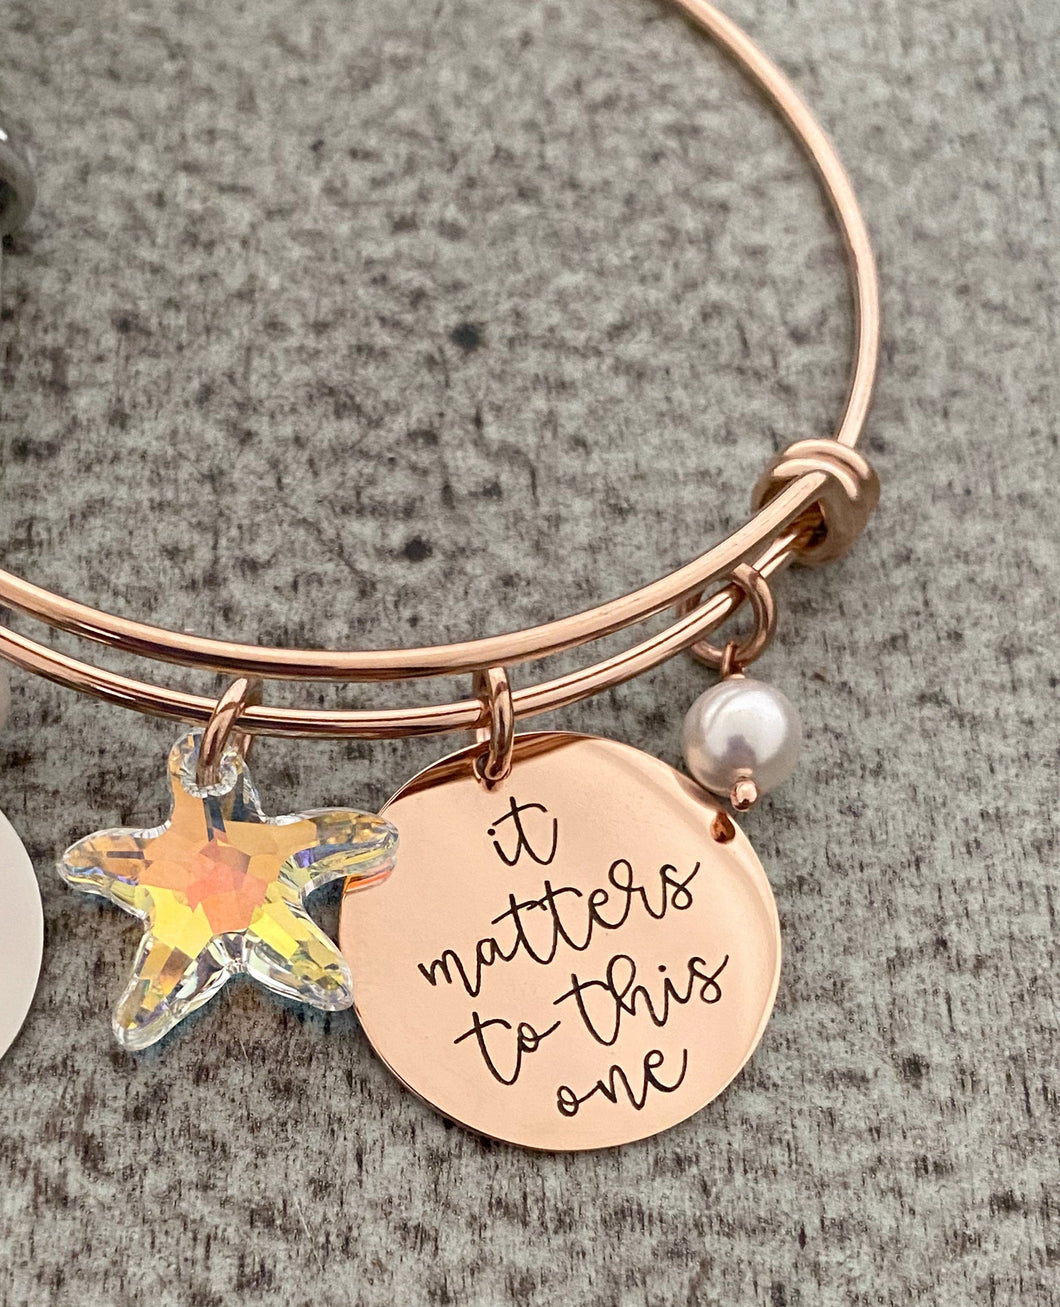 Rose gold, gold or stainless steel Swarovski starfish bracelet - it matters to this one - the starfish story  Teacher gift idea from student